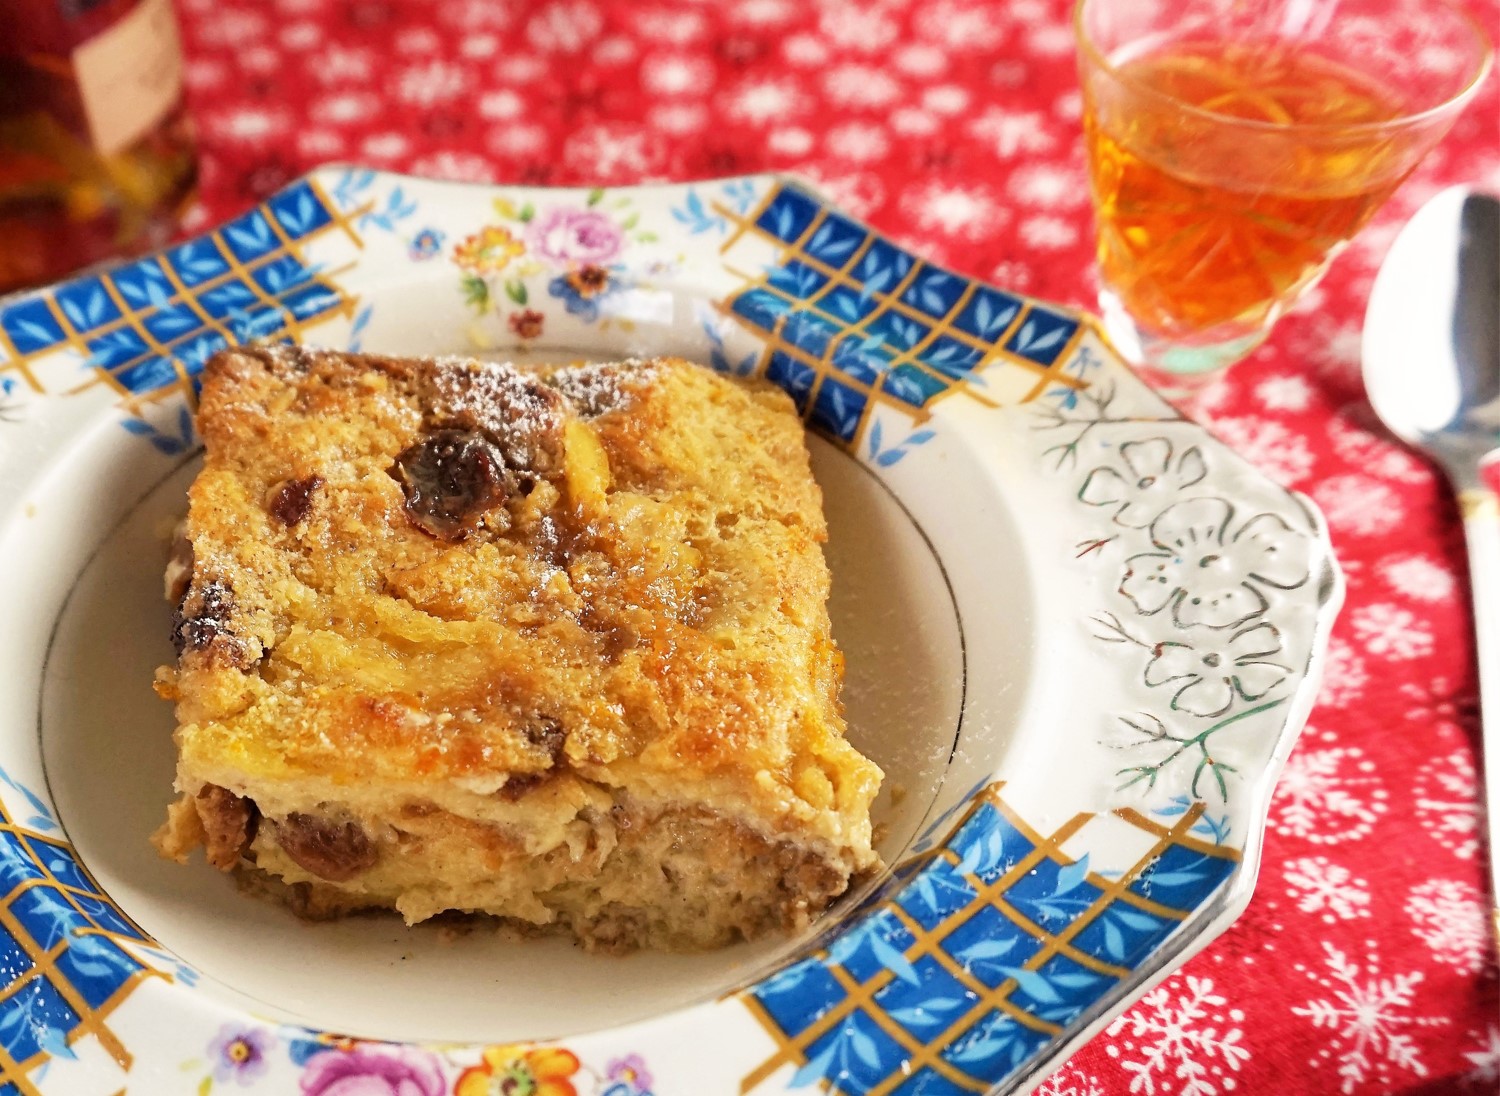 A delicious Panettone Pudding Recipe to wow your guests this Christmas or  use up your Christmas leftovers! Were you lucky enough to taste…